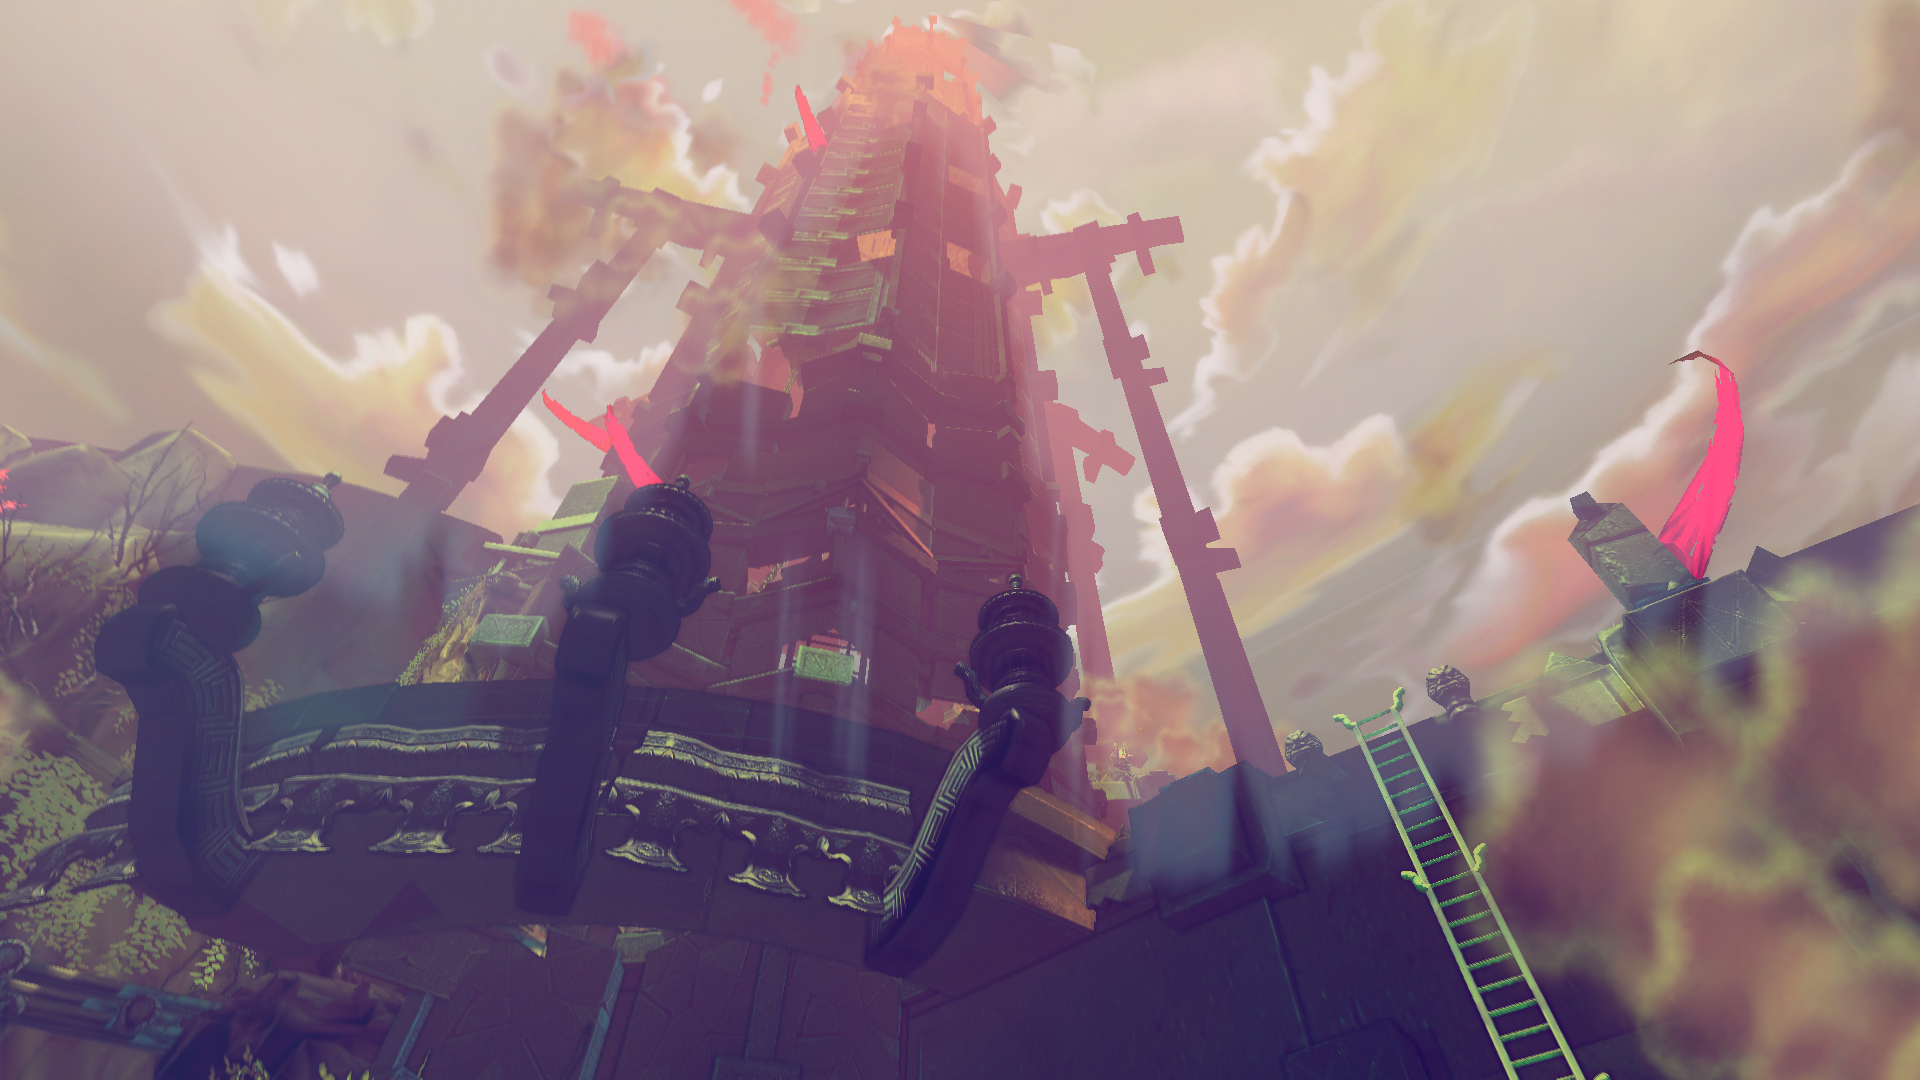 GDC 2015: Hands on Preview with Toren